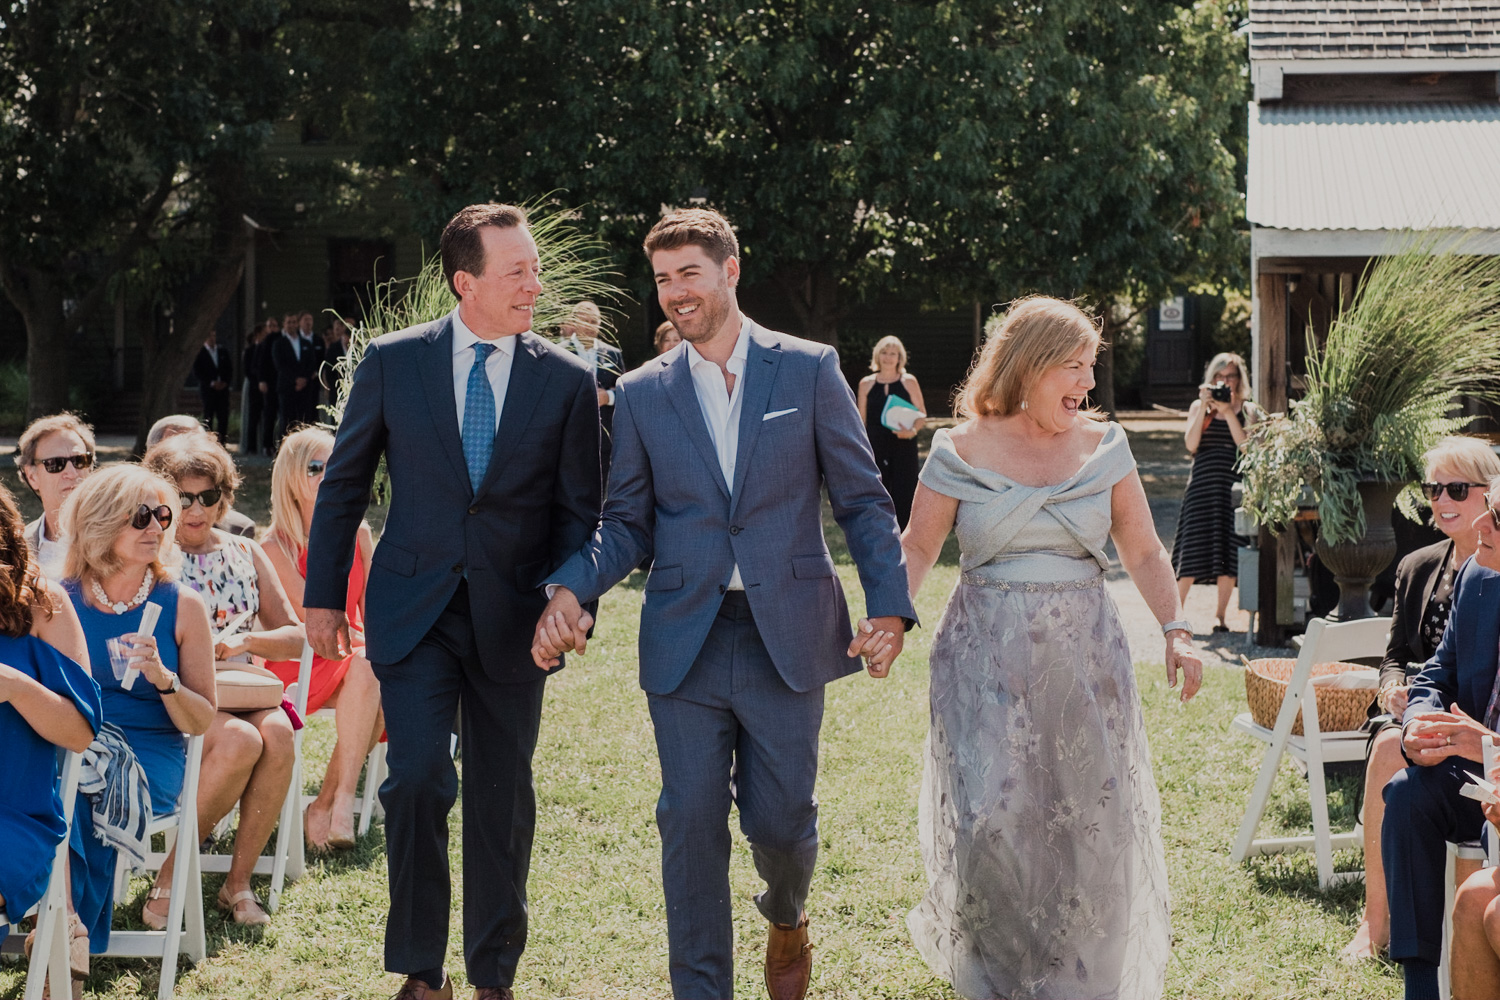 groom is escorted by both of his parents down the aisle at the start of wedding